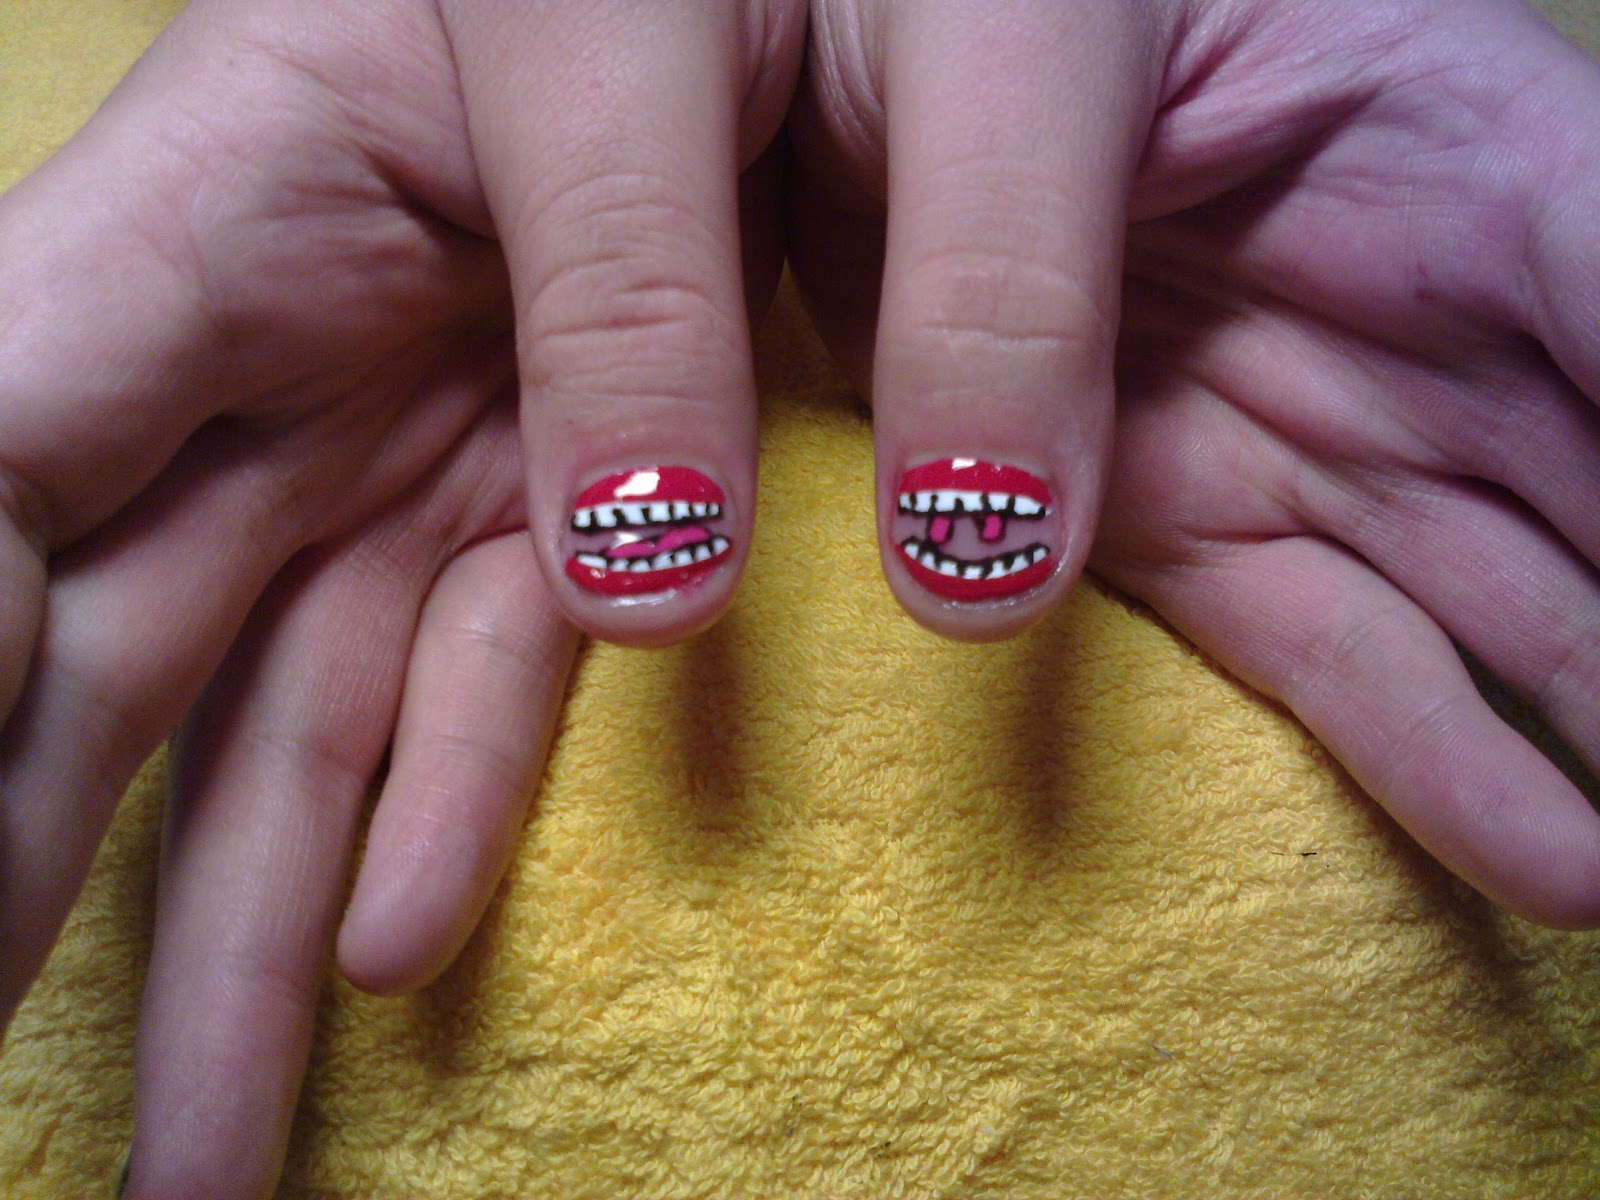 Lipstick Decals
4. Mouth Nail Art - wide 2